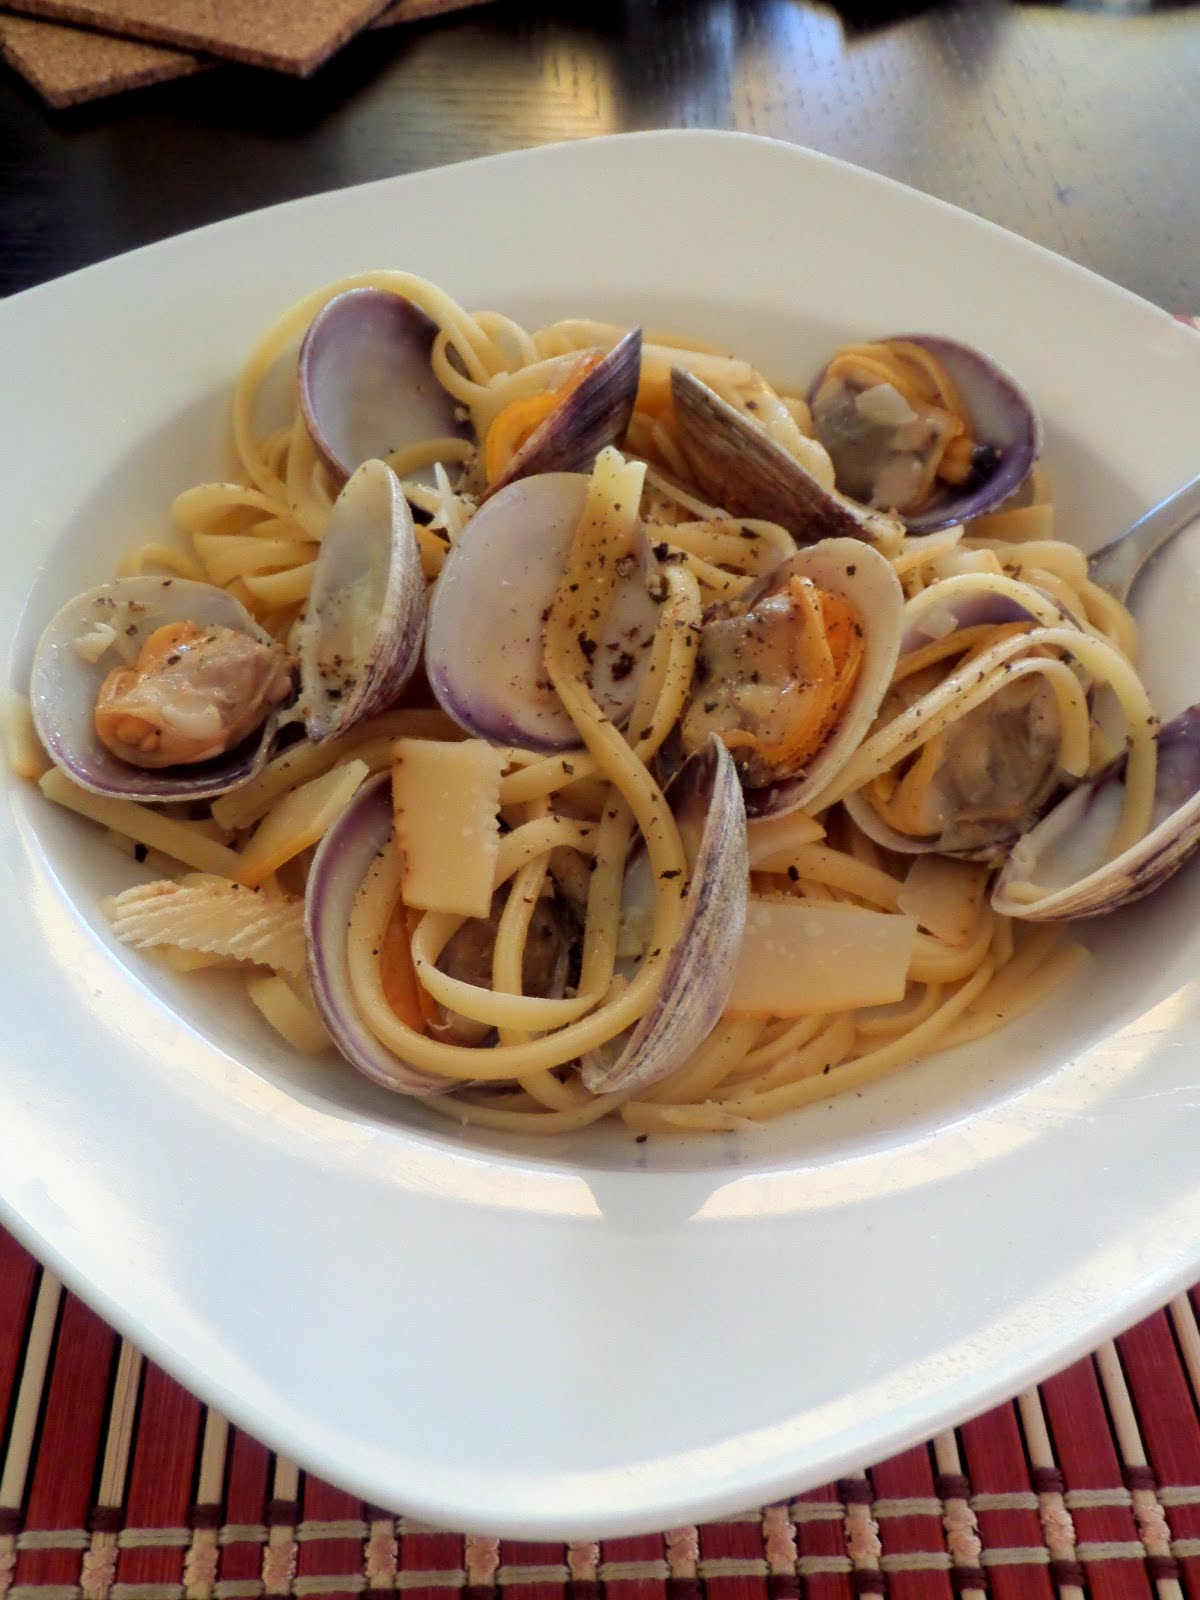 Clam Linguine:  Clams cooked in white wine sauce then tossed with linguine.  A delicious dinner that may look fancy but is really quite simple.